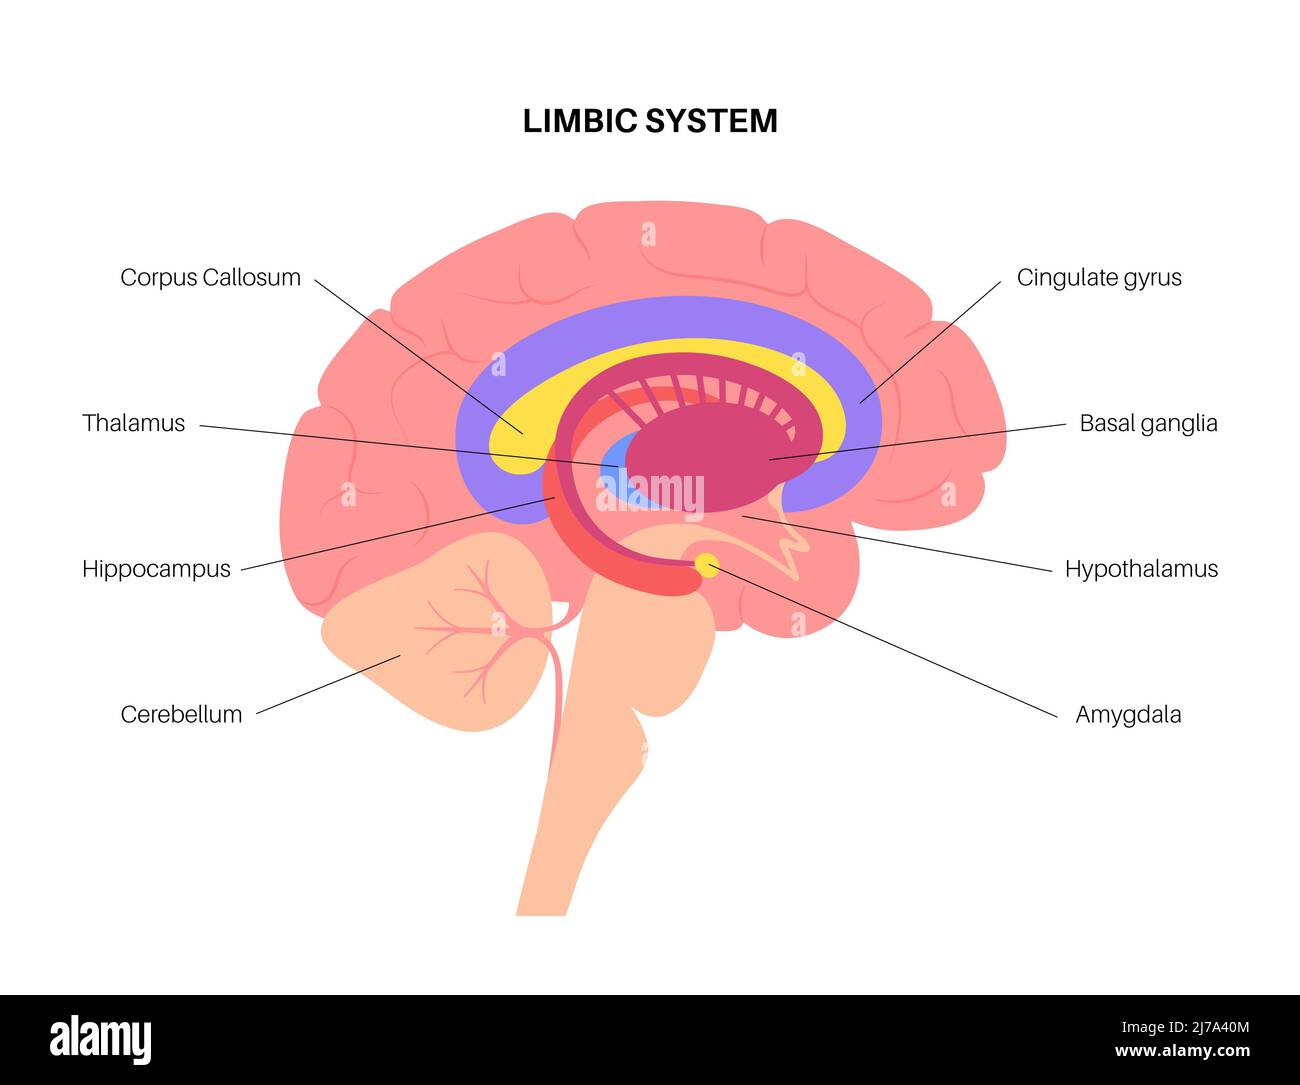 Limbic System And Basal Ganglia